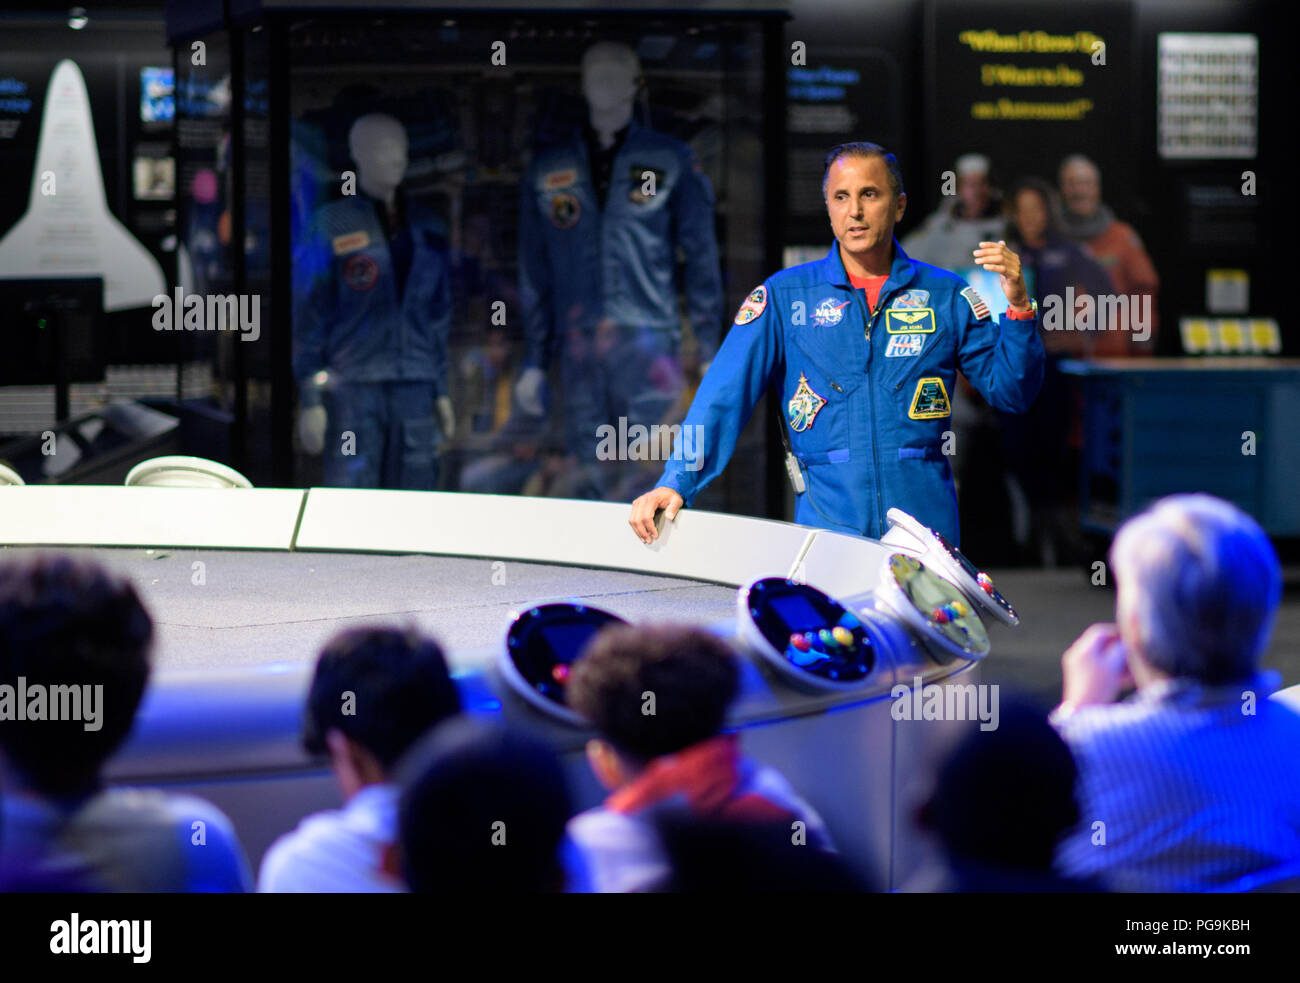 NASA astronaut Joe Acaba answers an audience members question prior to a presentation, Thursday, June 14, 2018 at the Smithsonian National Air and Space Museum in Washington. Acaba and astronaut Mark Vande Hei answered questions from the audience and spoke about their experiences aboard the International Space Station for 168 days as part of Expedition 53 and 54. Stock Photo